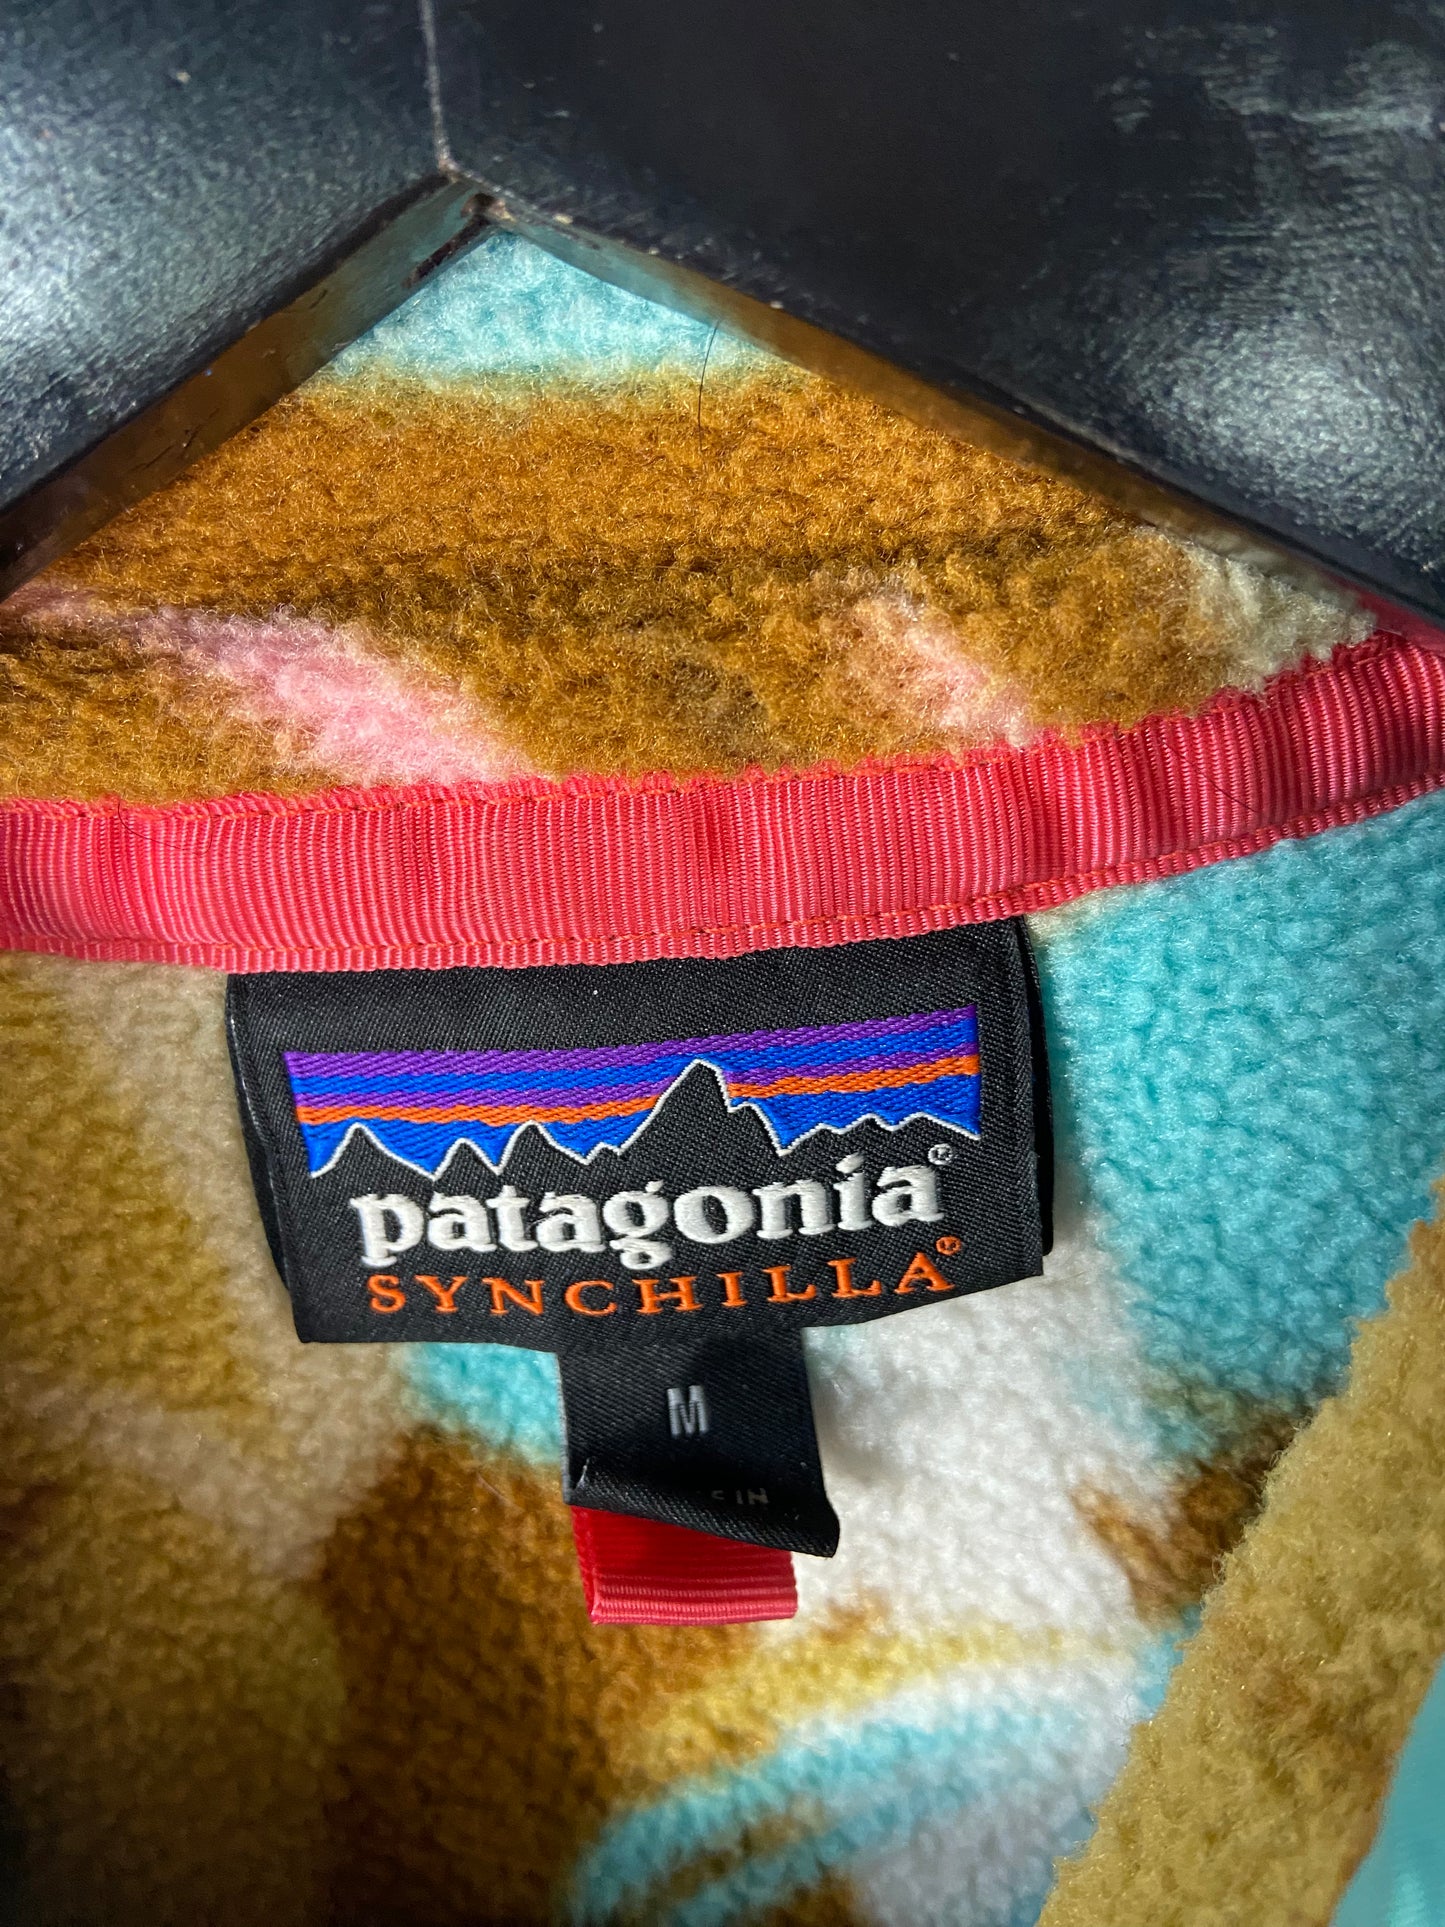 Load image into Gallery viewer, Patagonia Quarter Button Up Tropical Fleece Jacket Sz M
